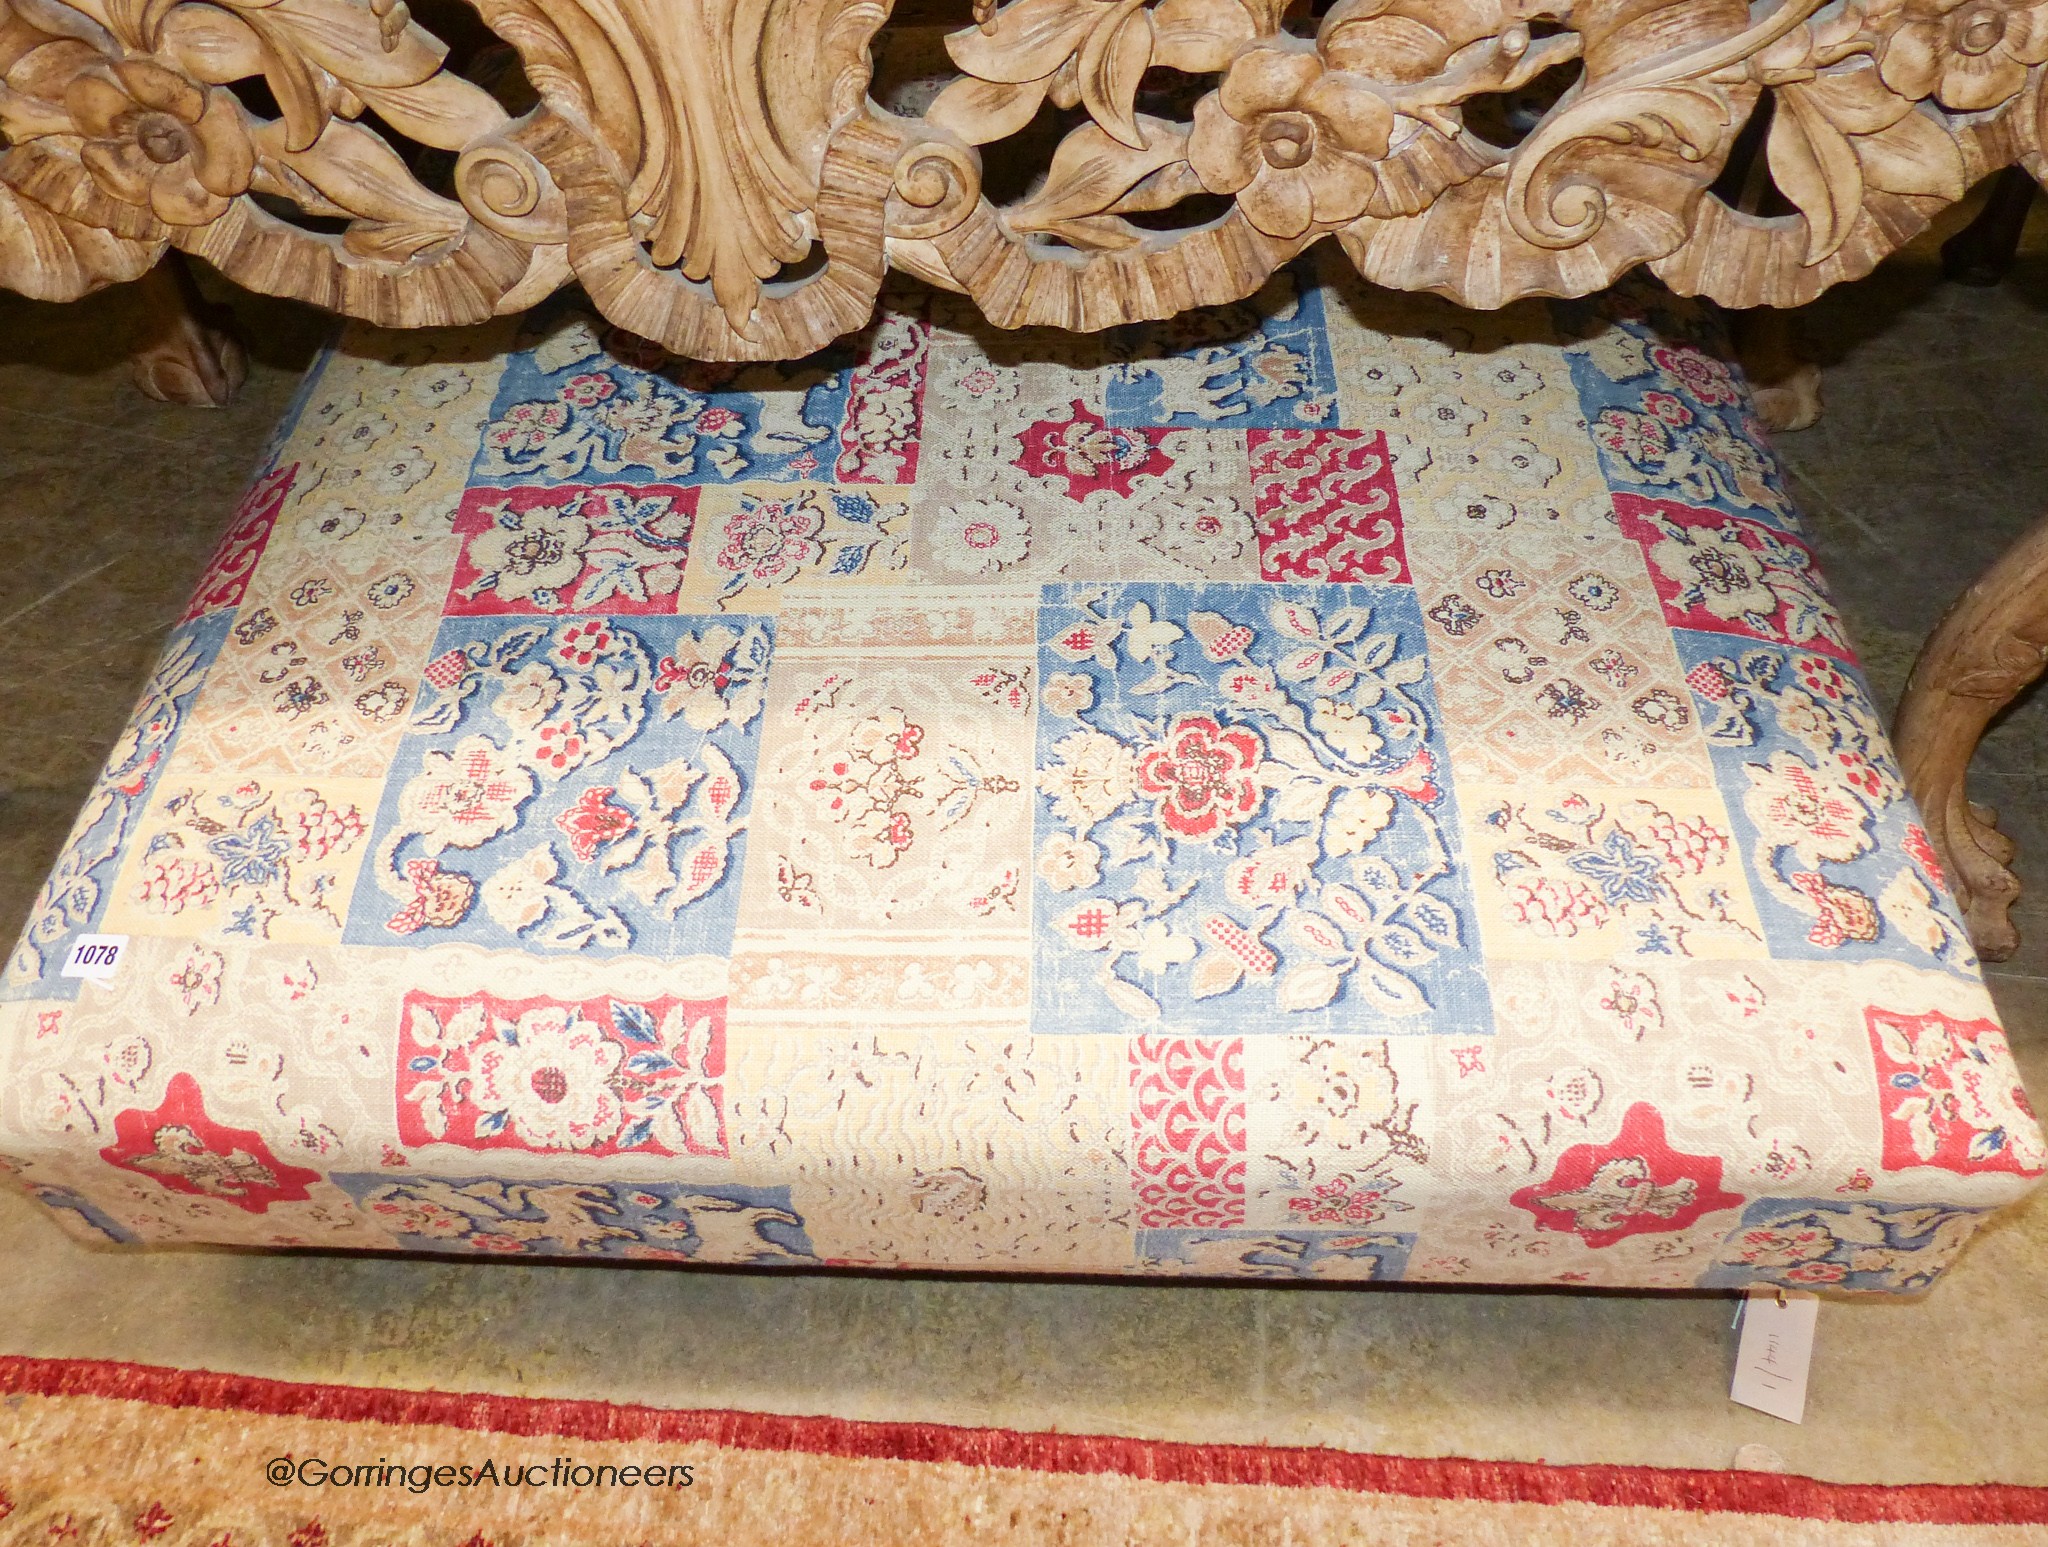 A Victorian style upholstered footstool in Andrew Martin fabric. W-103, D-95, H-28cm.